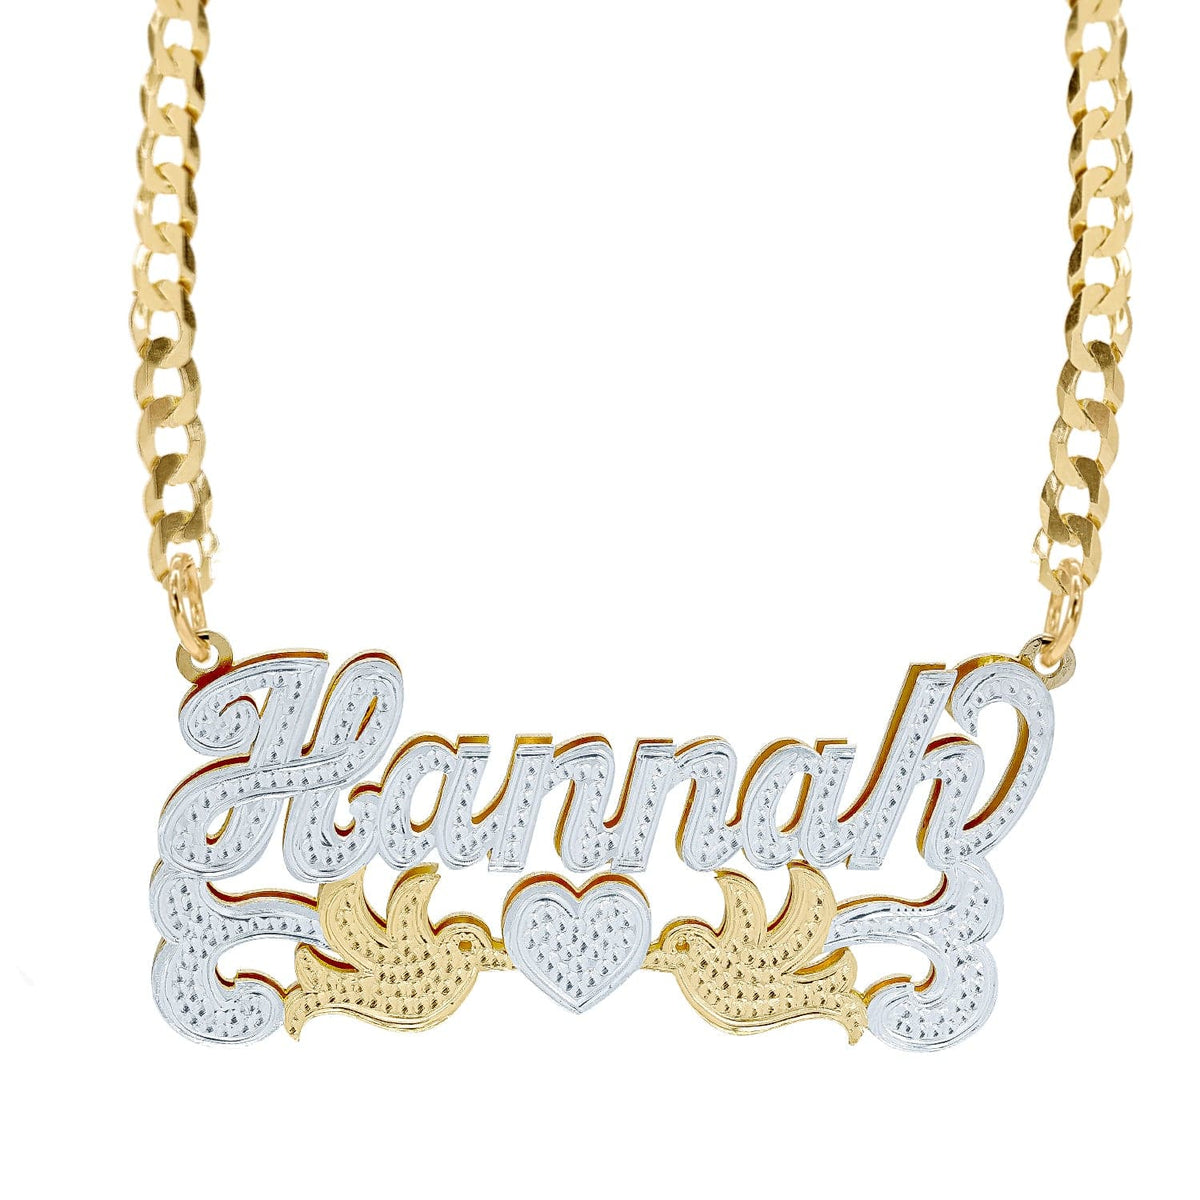 Handmade 3D Nameplate Necklace with Diamond Beading (Order Any Name) -  Yellow Gold, White Gold or Rose Gold